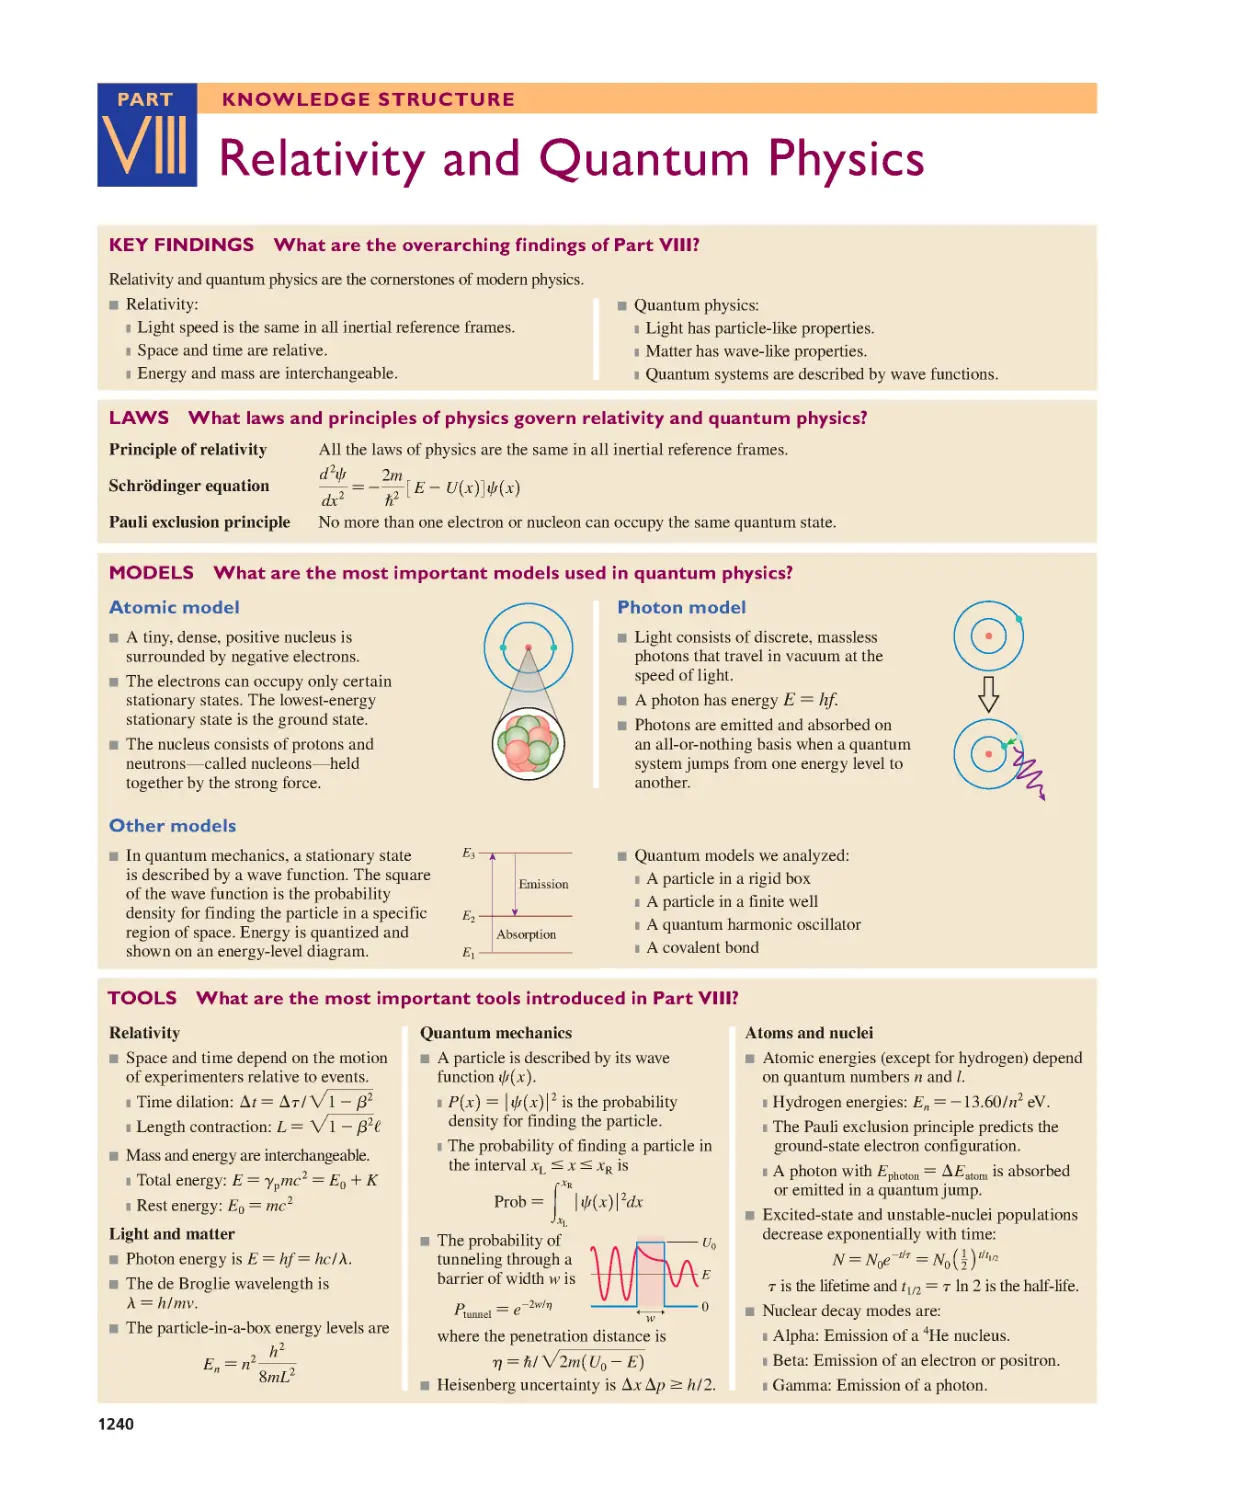 Part VIII: Knowledge Structure: Relativity and Quantum Physics